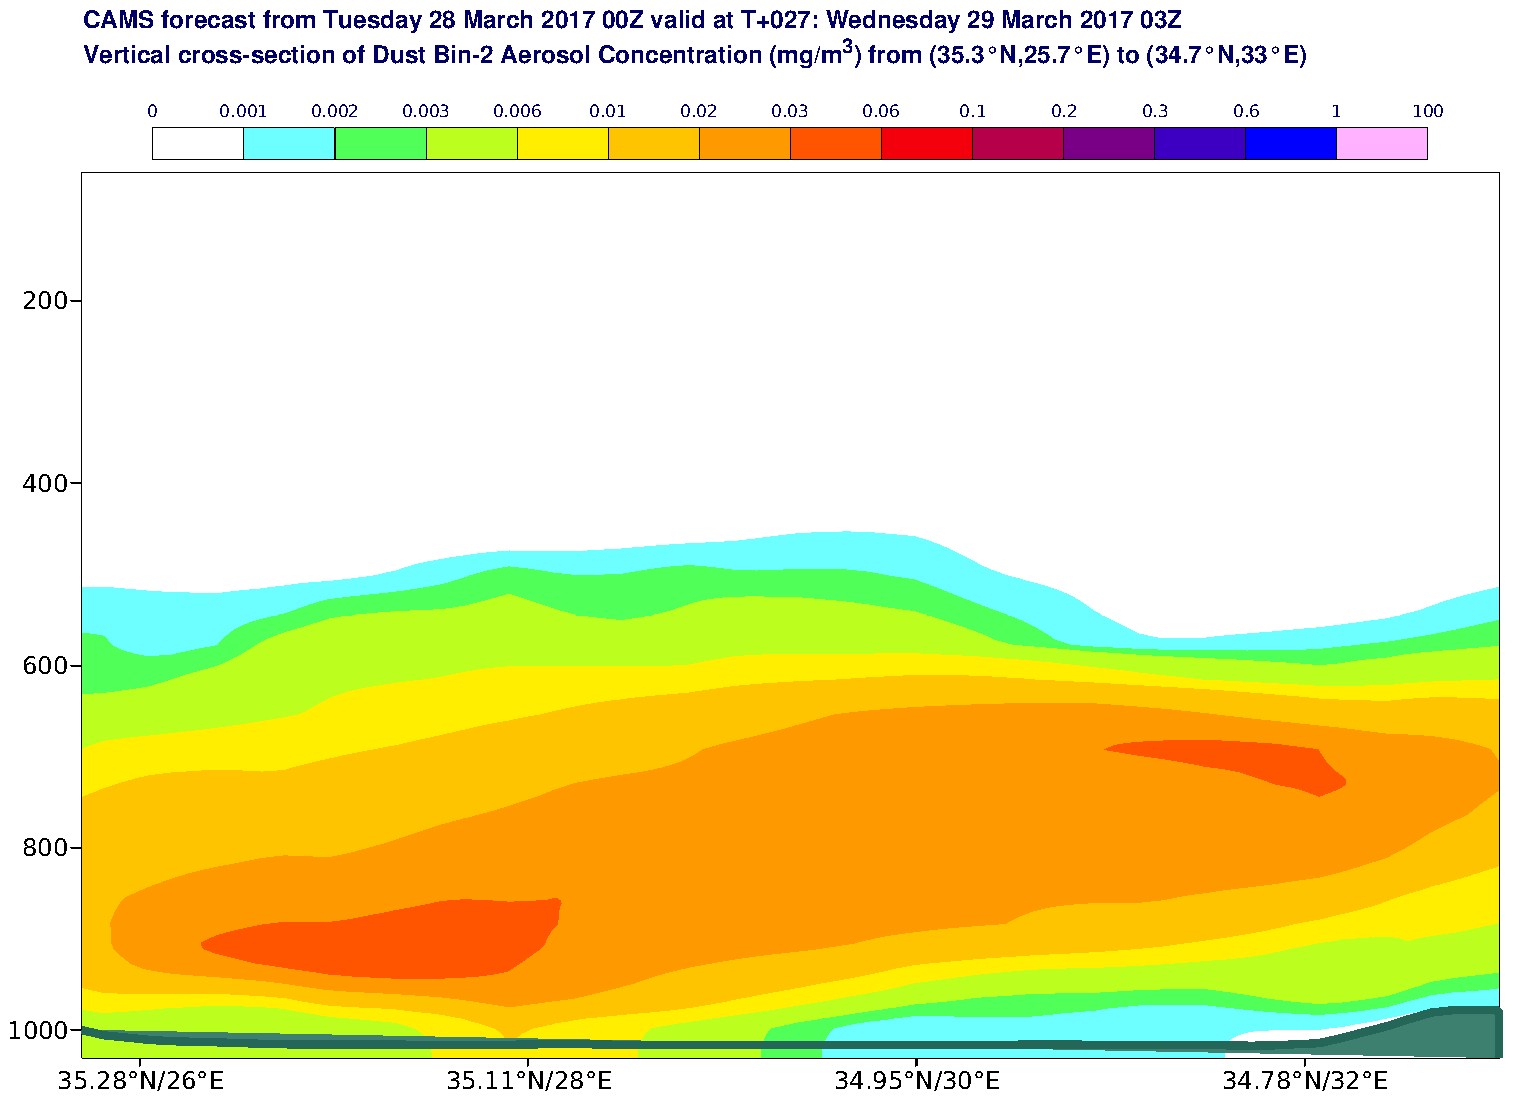 Vertical cross-section of Dust Bin-2 Aerosol Concentration (mg/m3) valid at T27 - 2017-03-29 03:00